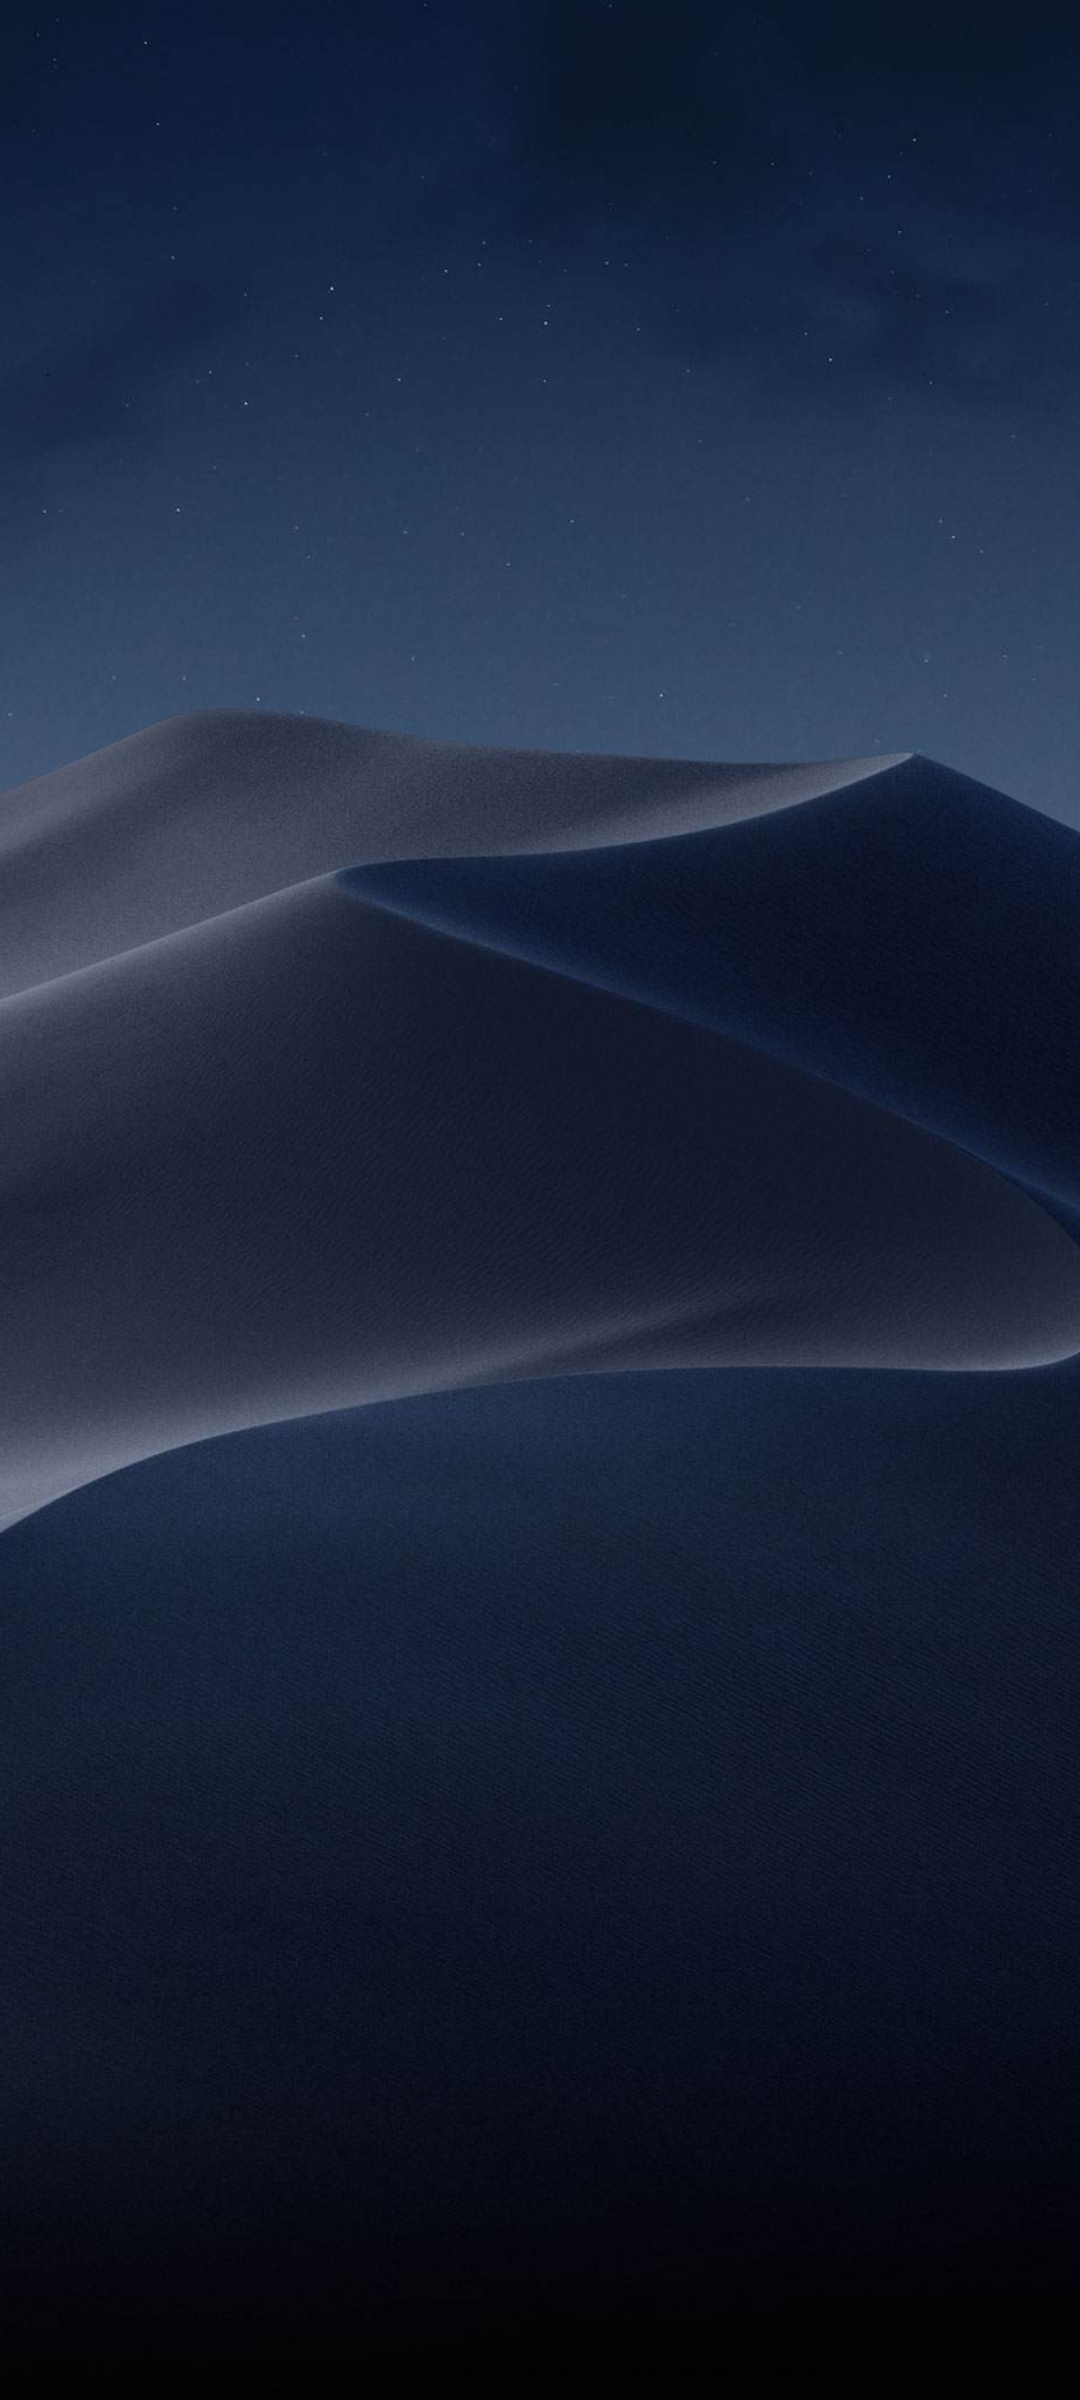 1080x2400 Desert Macos Mojave Stock 1080x2400 Resolution Wallpaper Hd Nature 4k Wallpapers Images Photos And Background Wallpapers Den